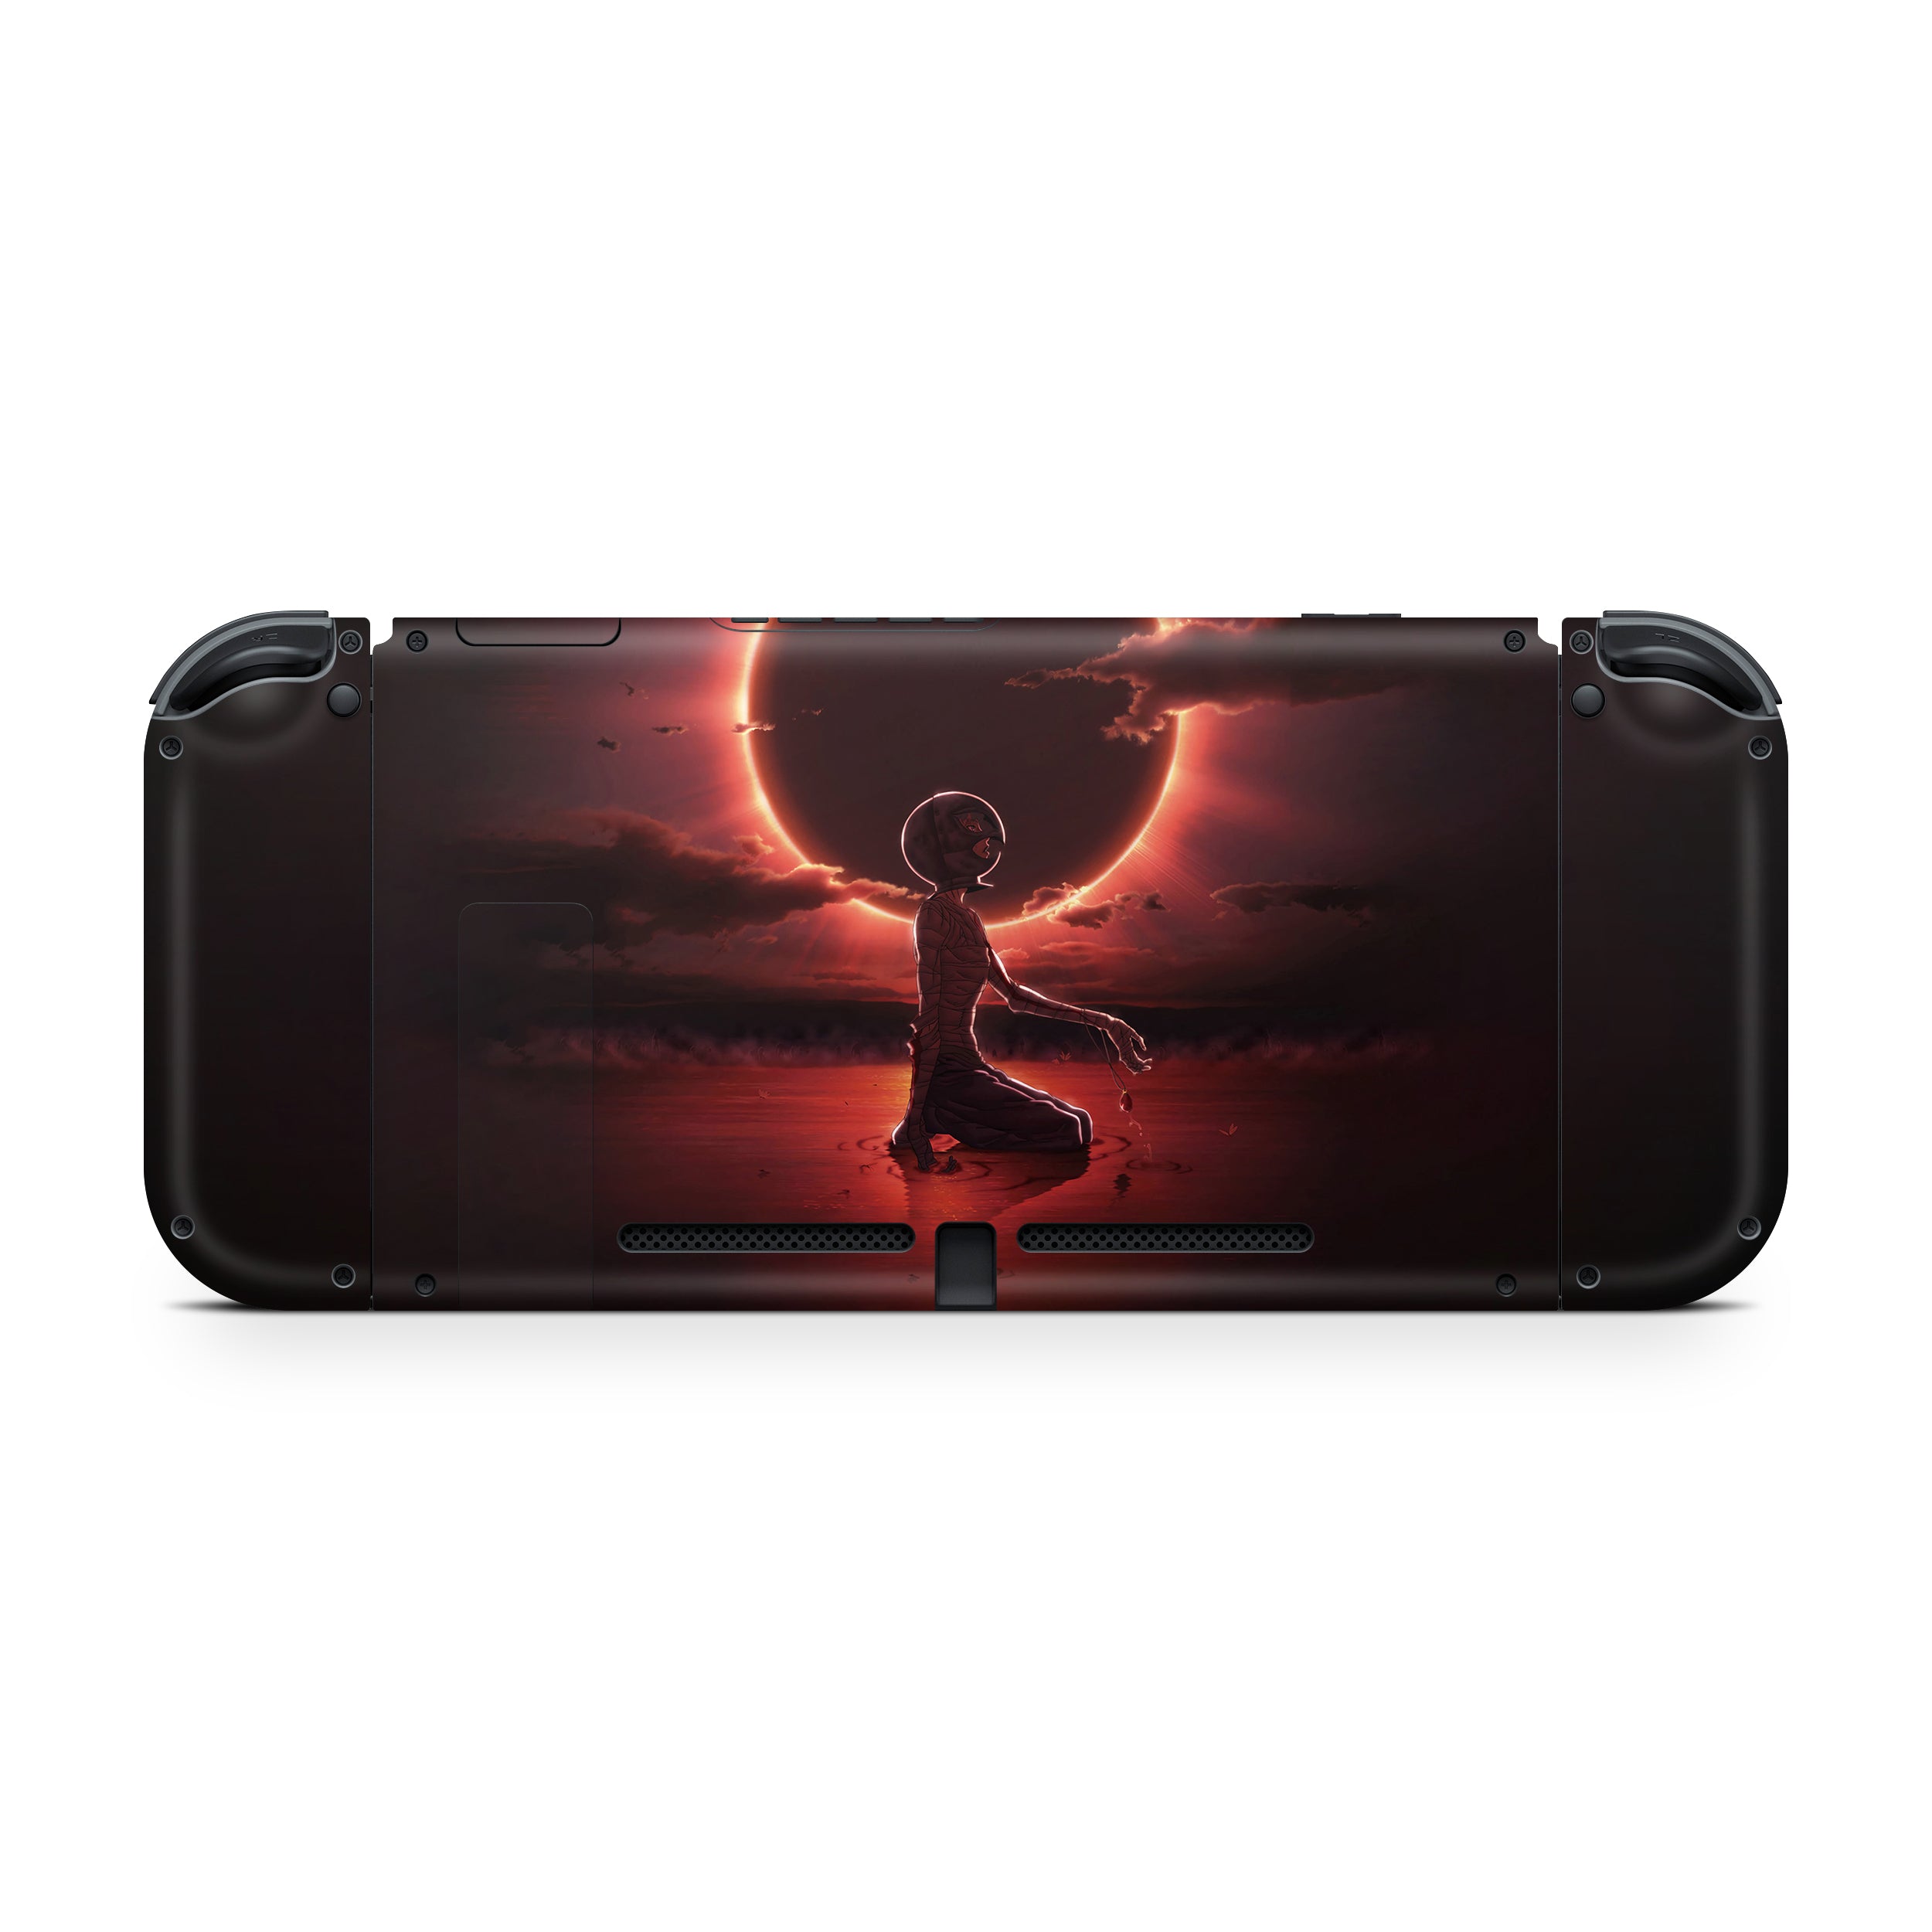 A video game skin featuring a Berserk Griffith design for the Nintendo Switch.